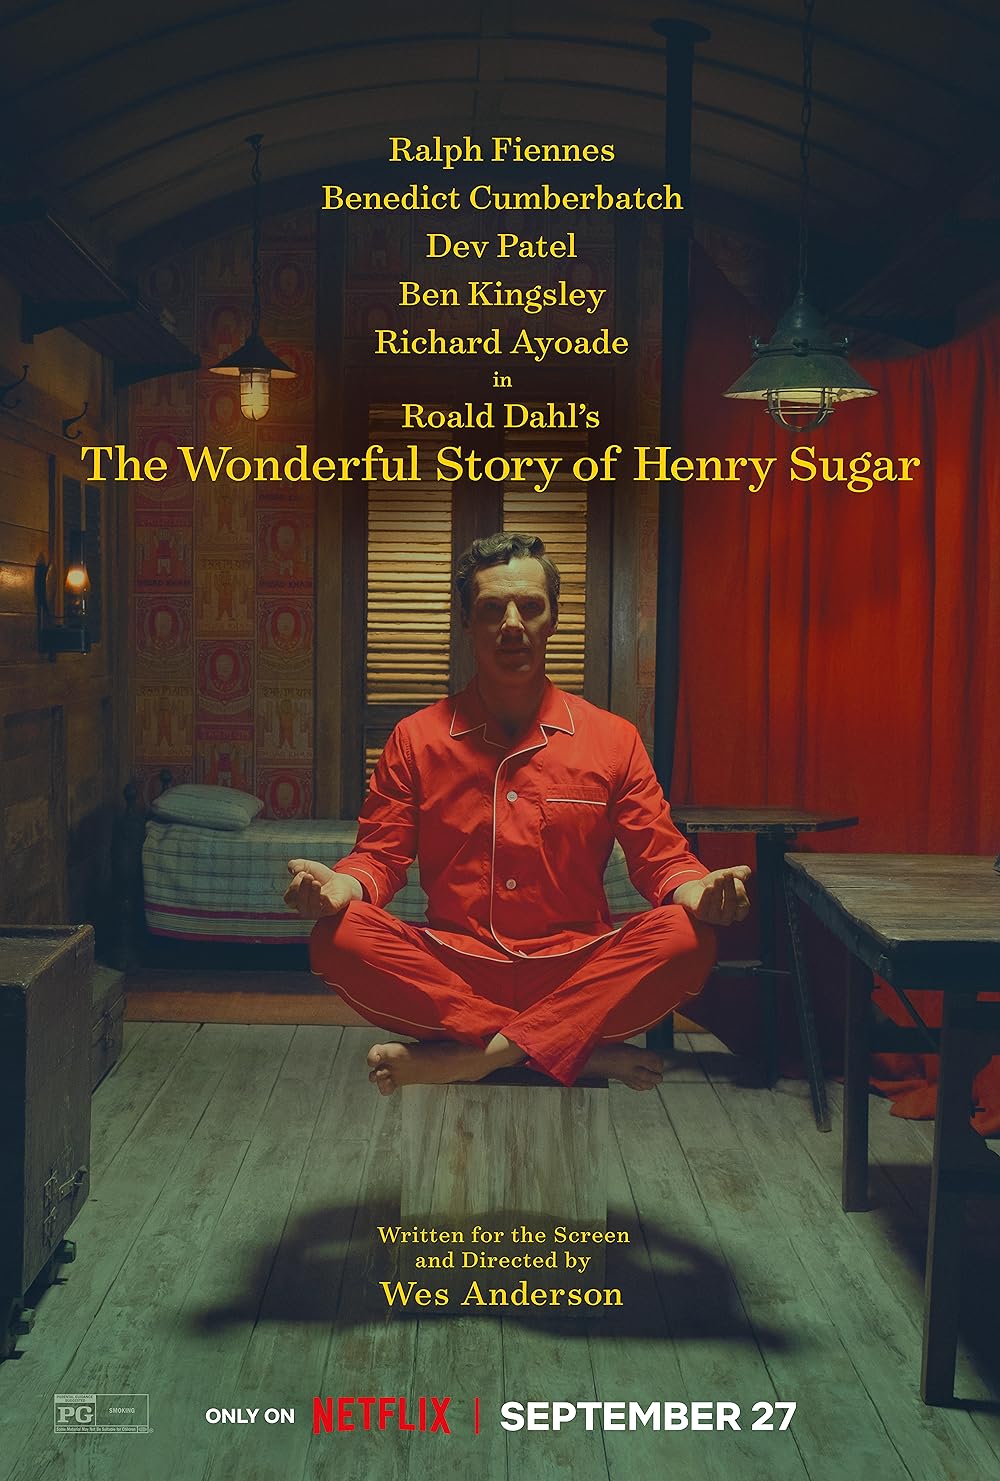 The Wonderful Story of Henry Sugar - Netflix (September 27)Renowned Hollywood auteur Wes Anderson takes the helm in 